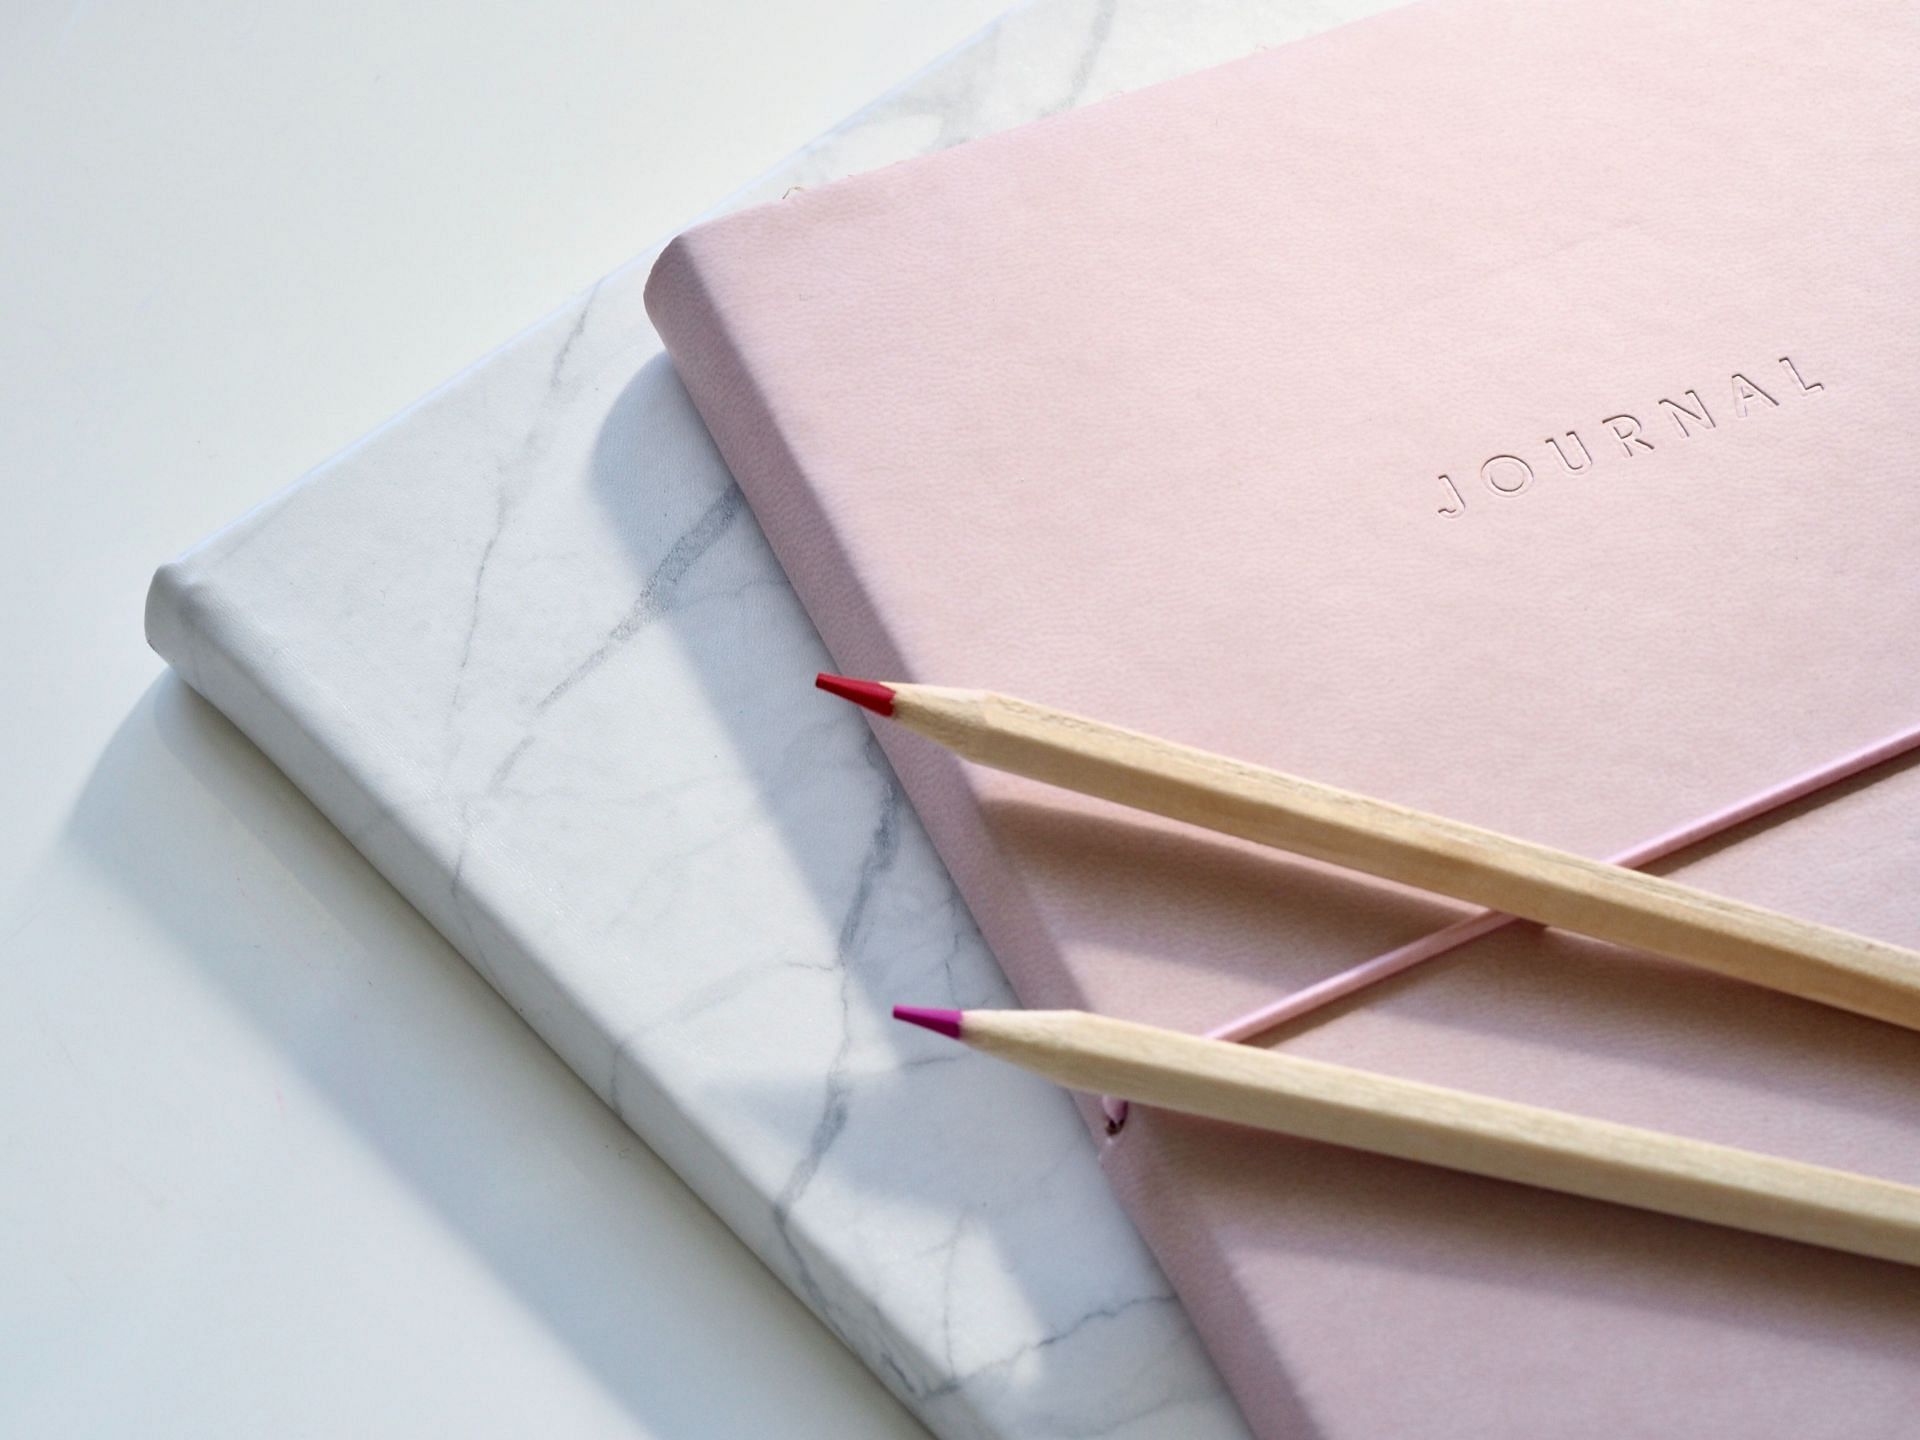 Journaling has many mental health benefits, including reduction of anxiety and stress. (Image via Pexels/Jess Bailey)